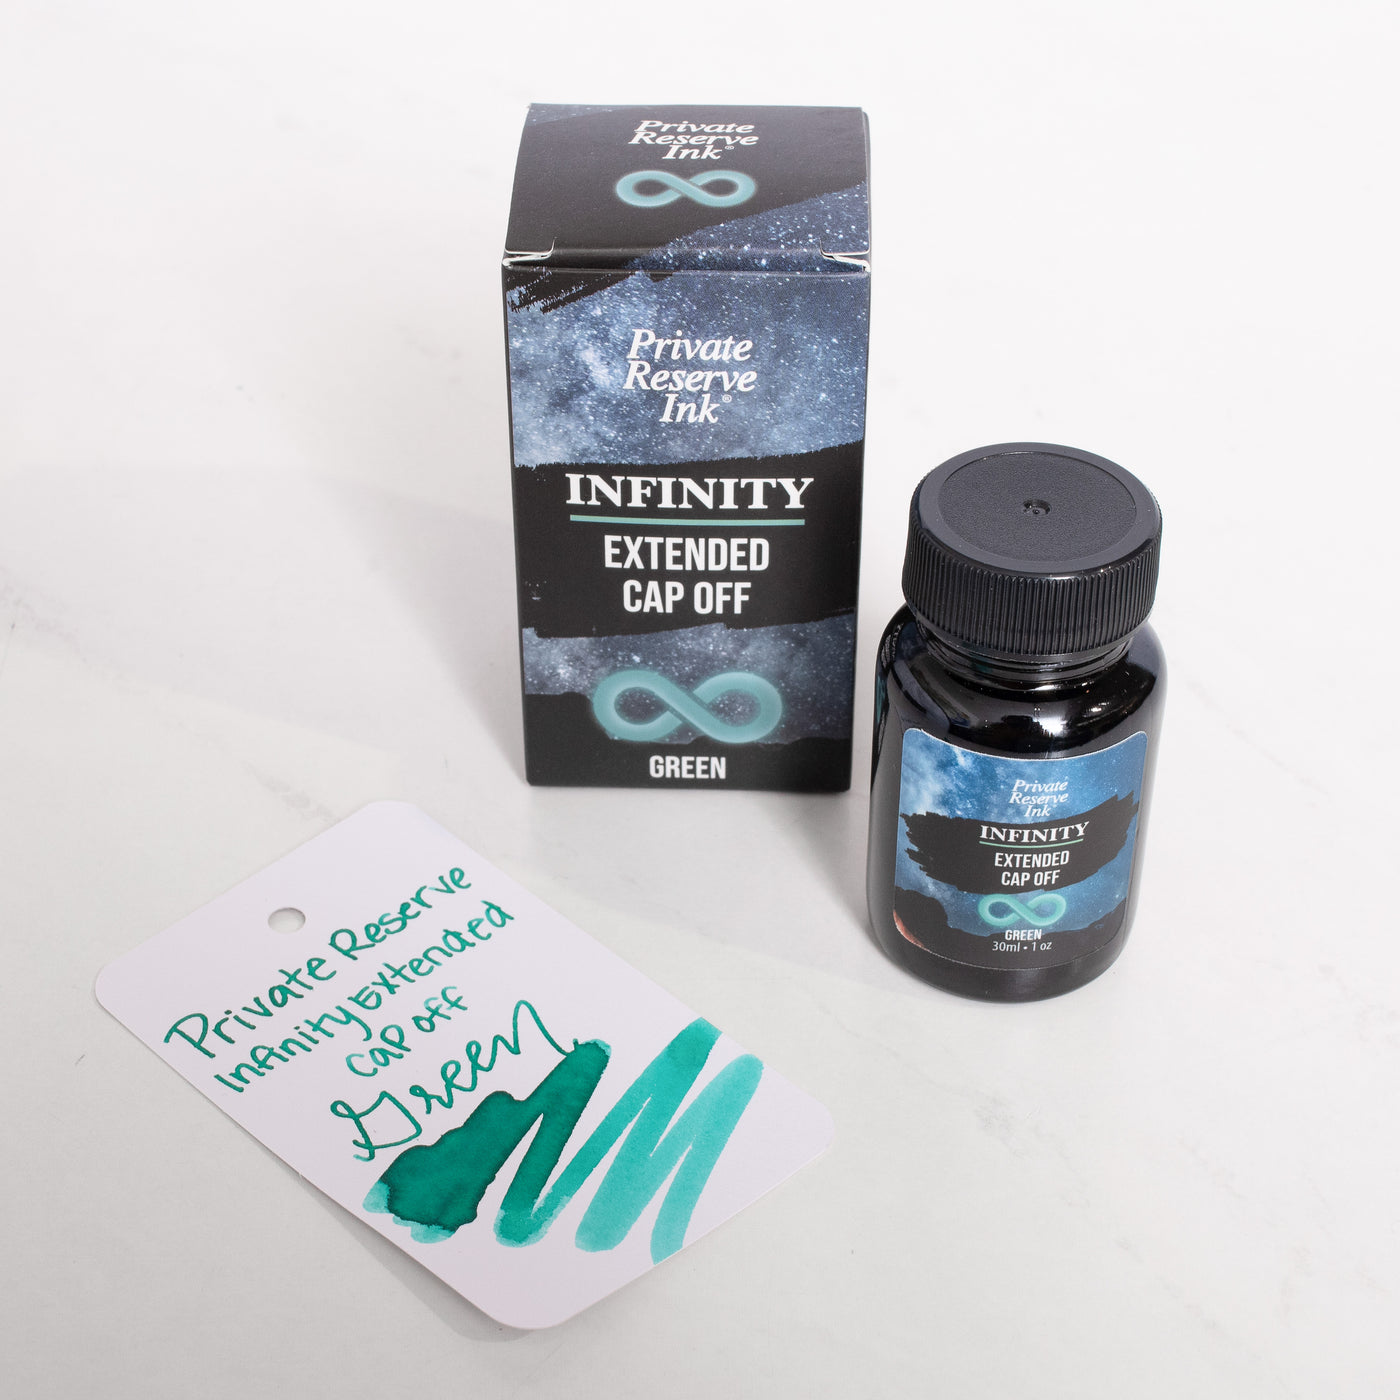 Private Reserve Infinity Extended Cap Off Green Ink Bottle